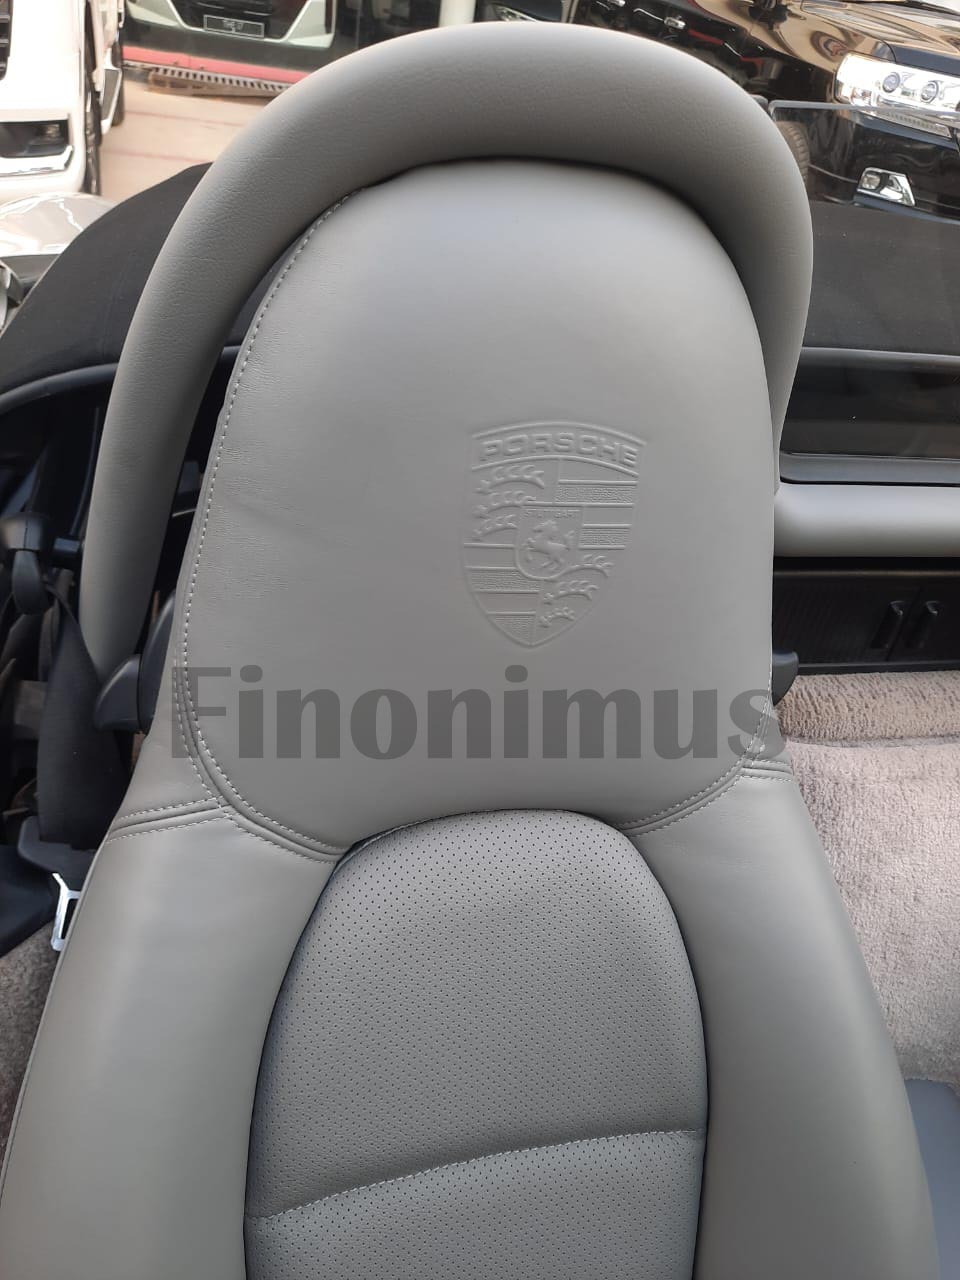 Porsche 986 Boxster Synthetic Leather Standard Seat Cover - Gray (Year 1997 to 2004) With Porsche Logo Embossing at Headrest